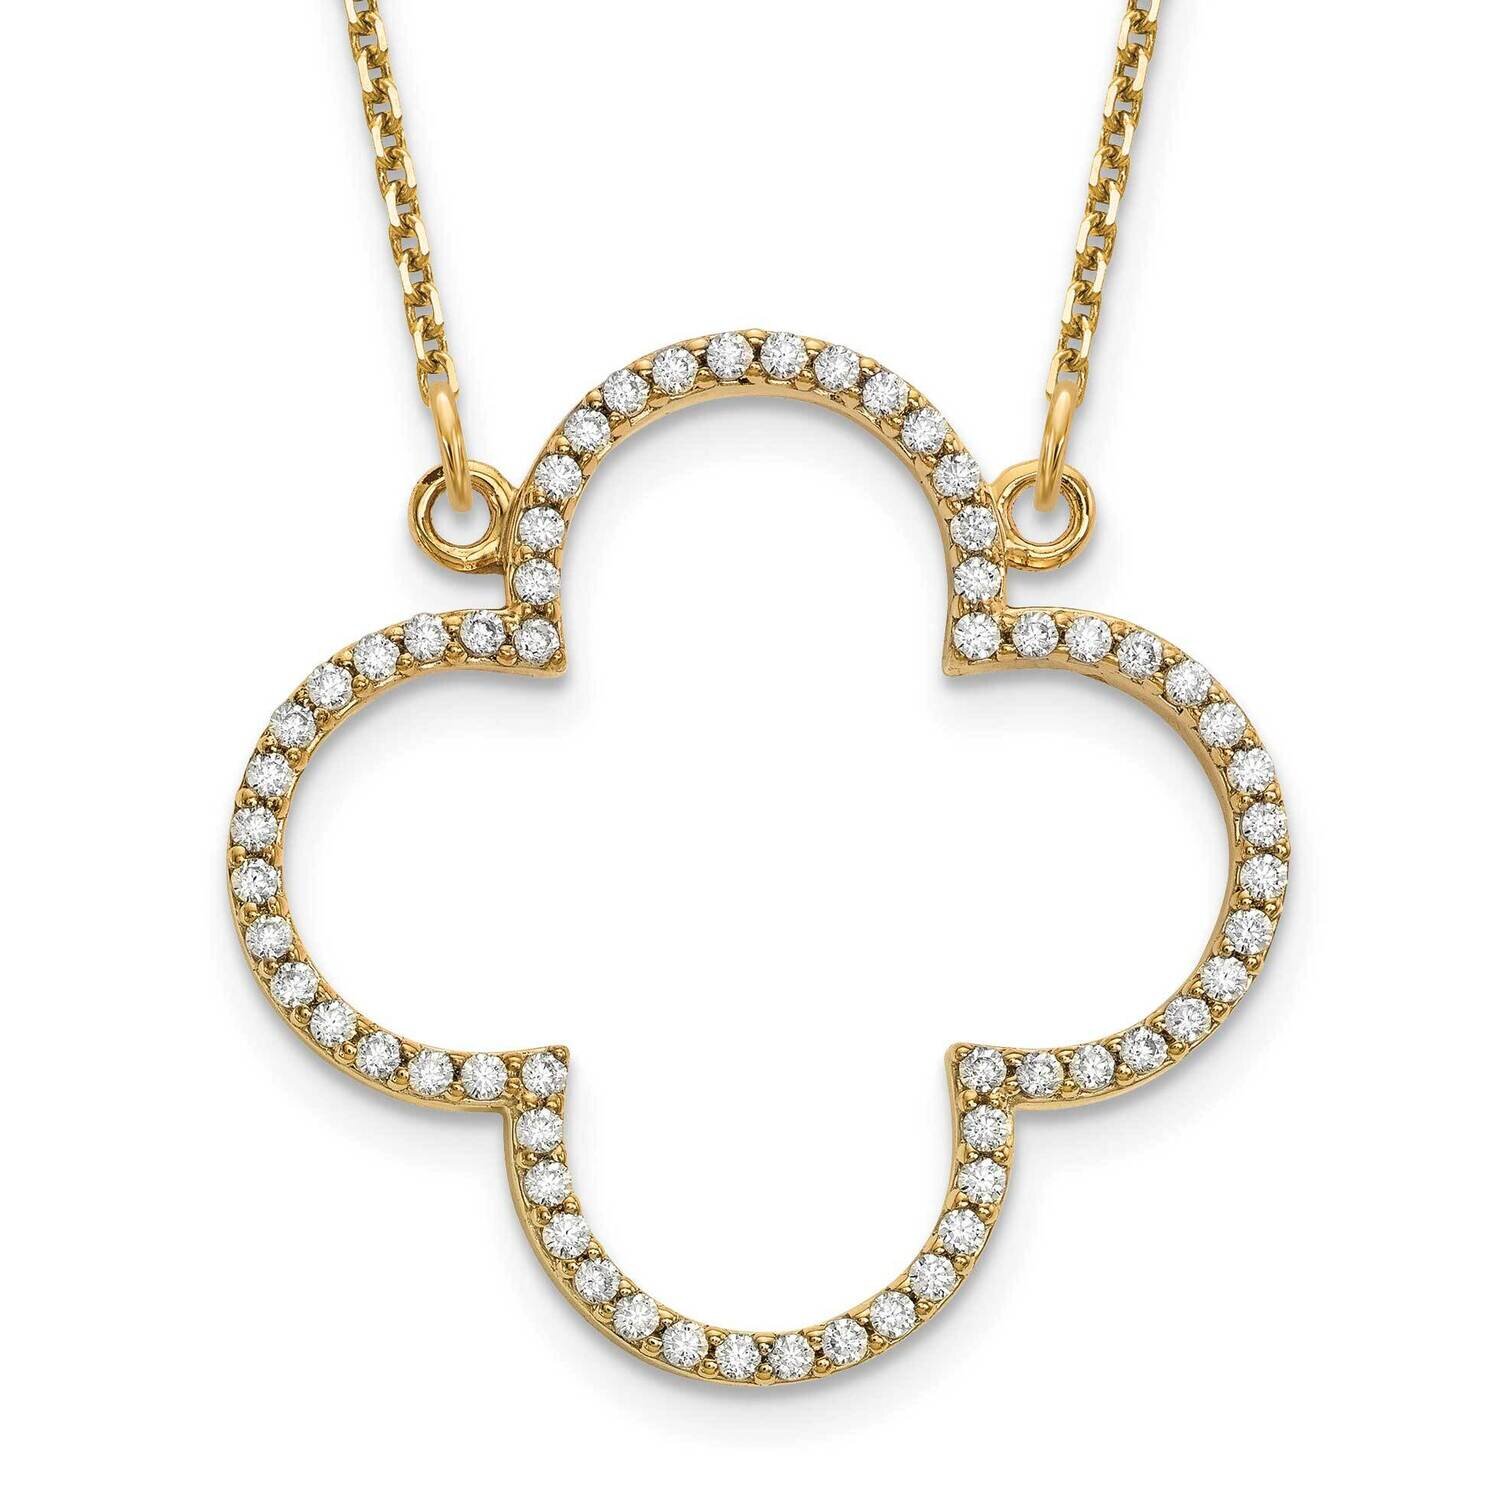 Medium Quatrefoil Design with Out Chain Necklace Mounting 18 Inch 14k Gold XP5051